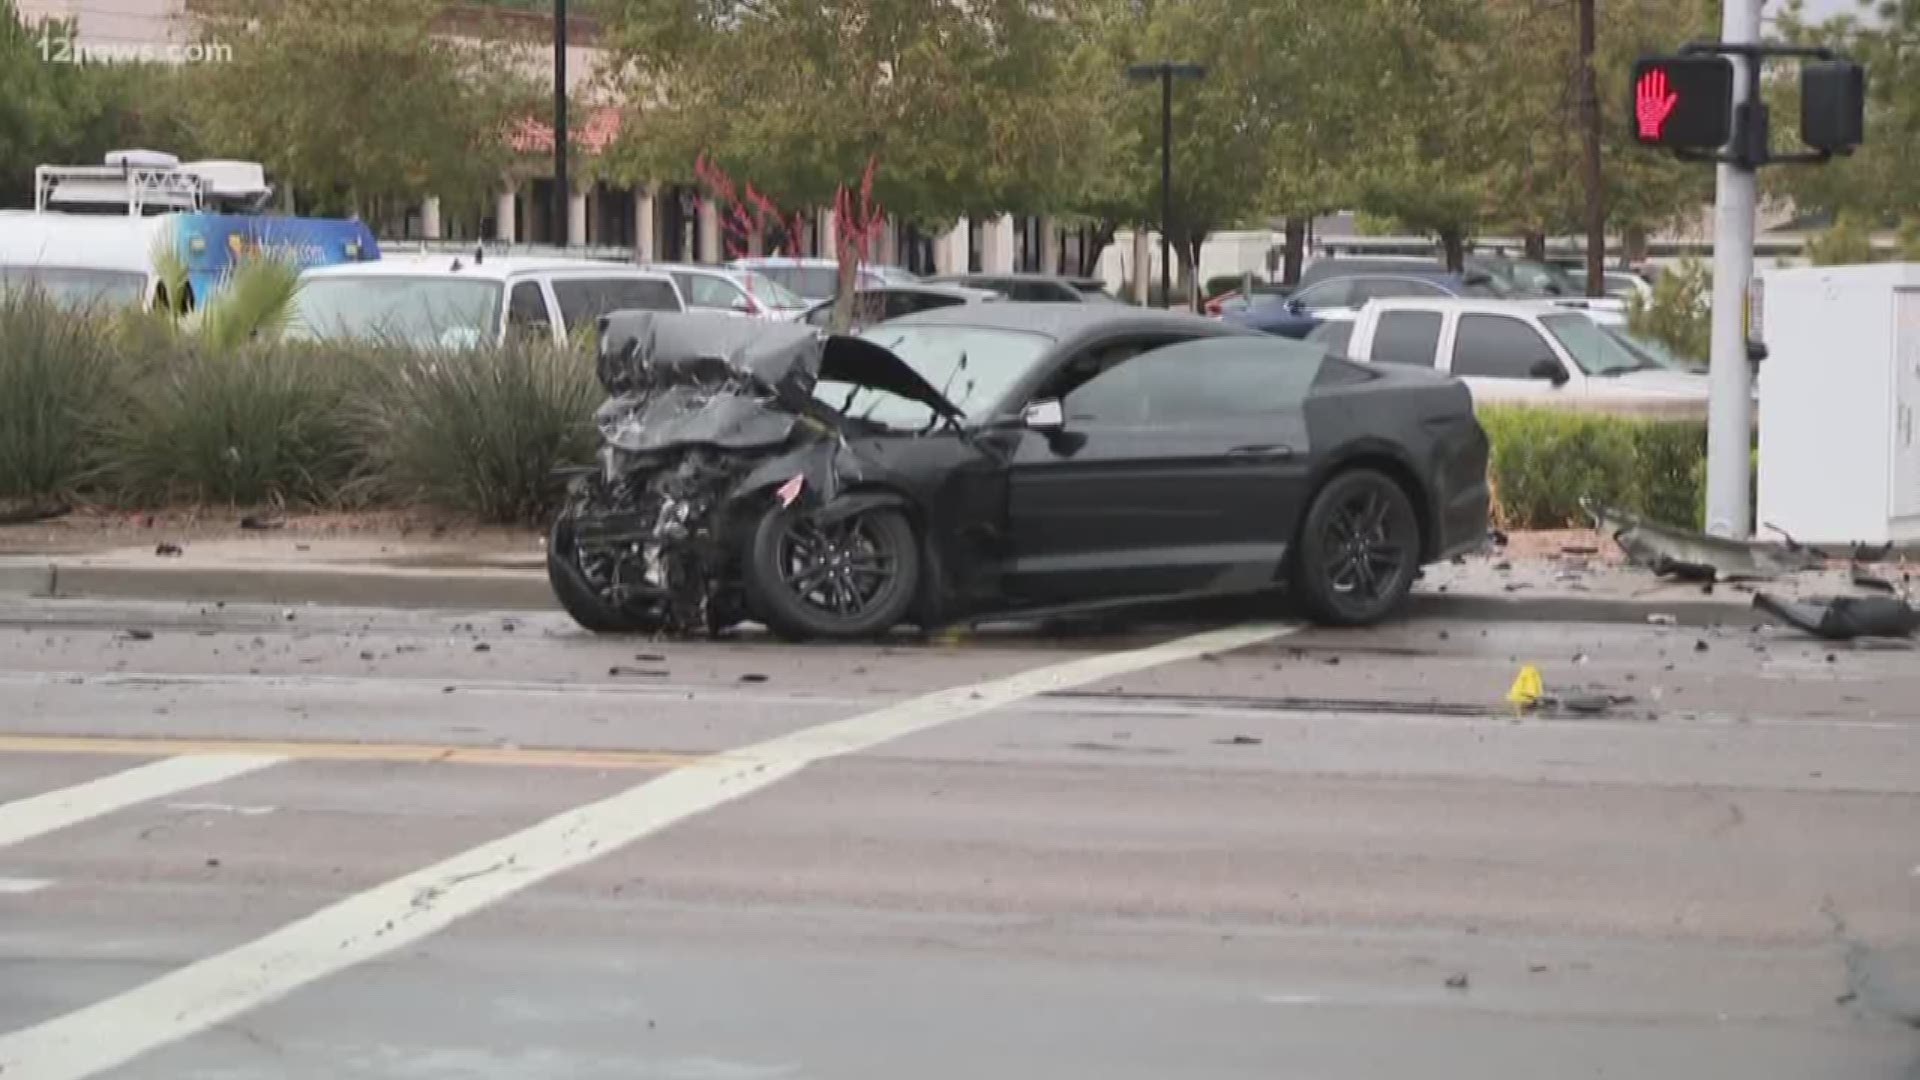 Tempe police say it's possible a driver who hit another car could be charged with manslaughter. The driver was speeding when he crashed into another car, killing a husband and wife.